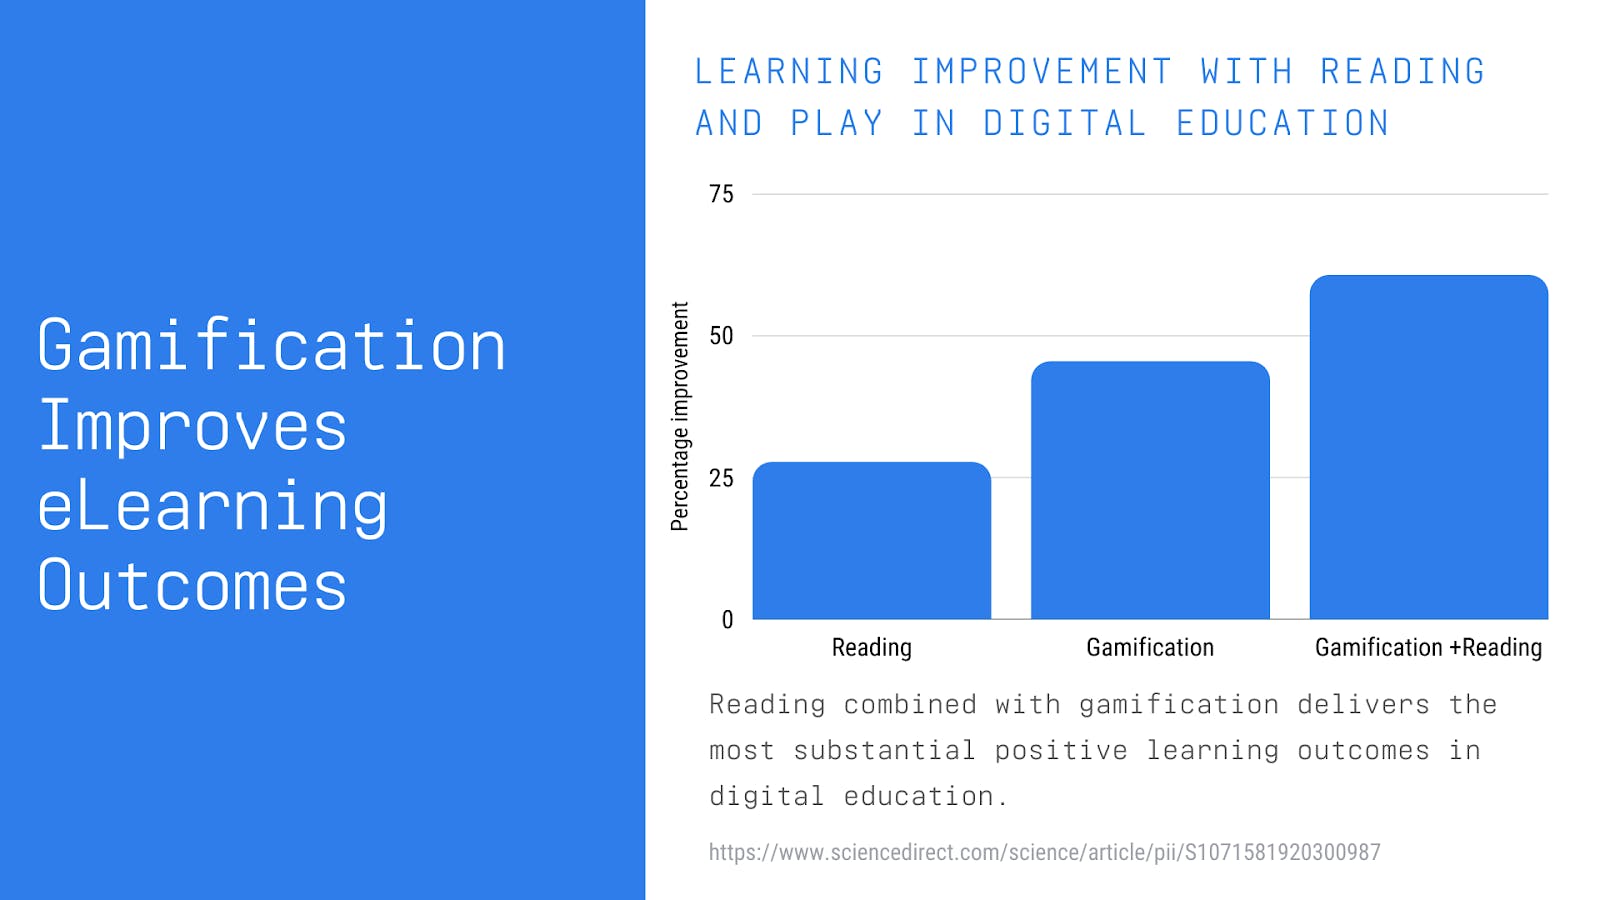 bar graph showing increased positive learning outcomes driven by gamified reading